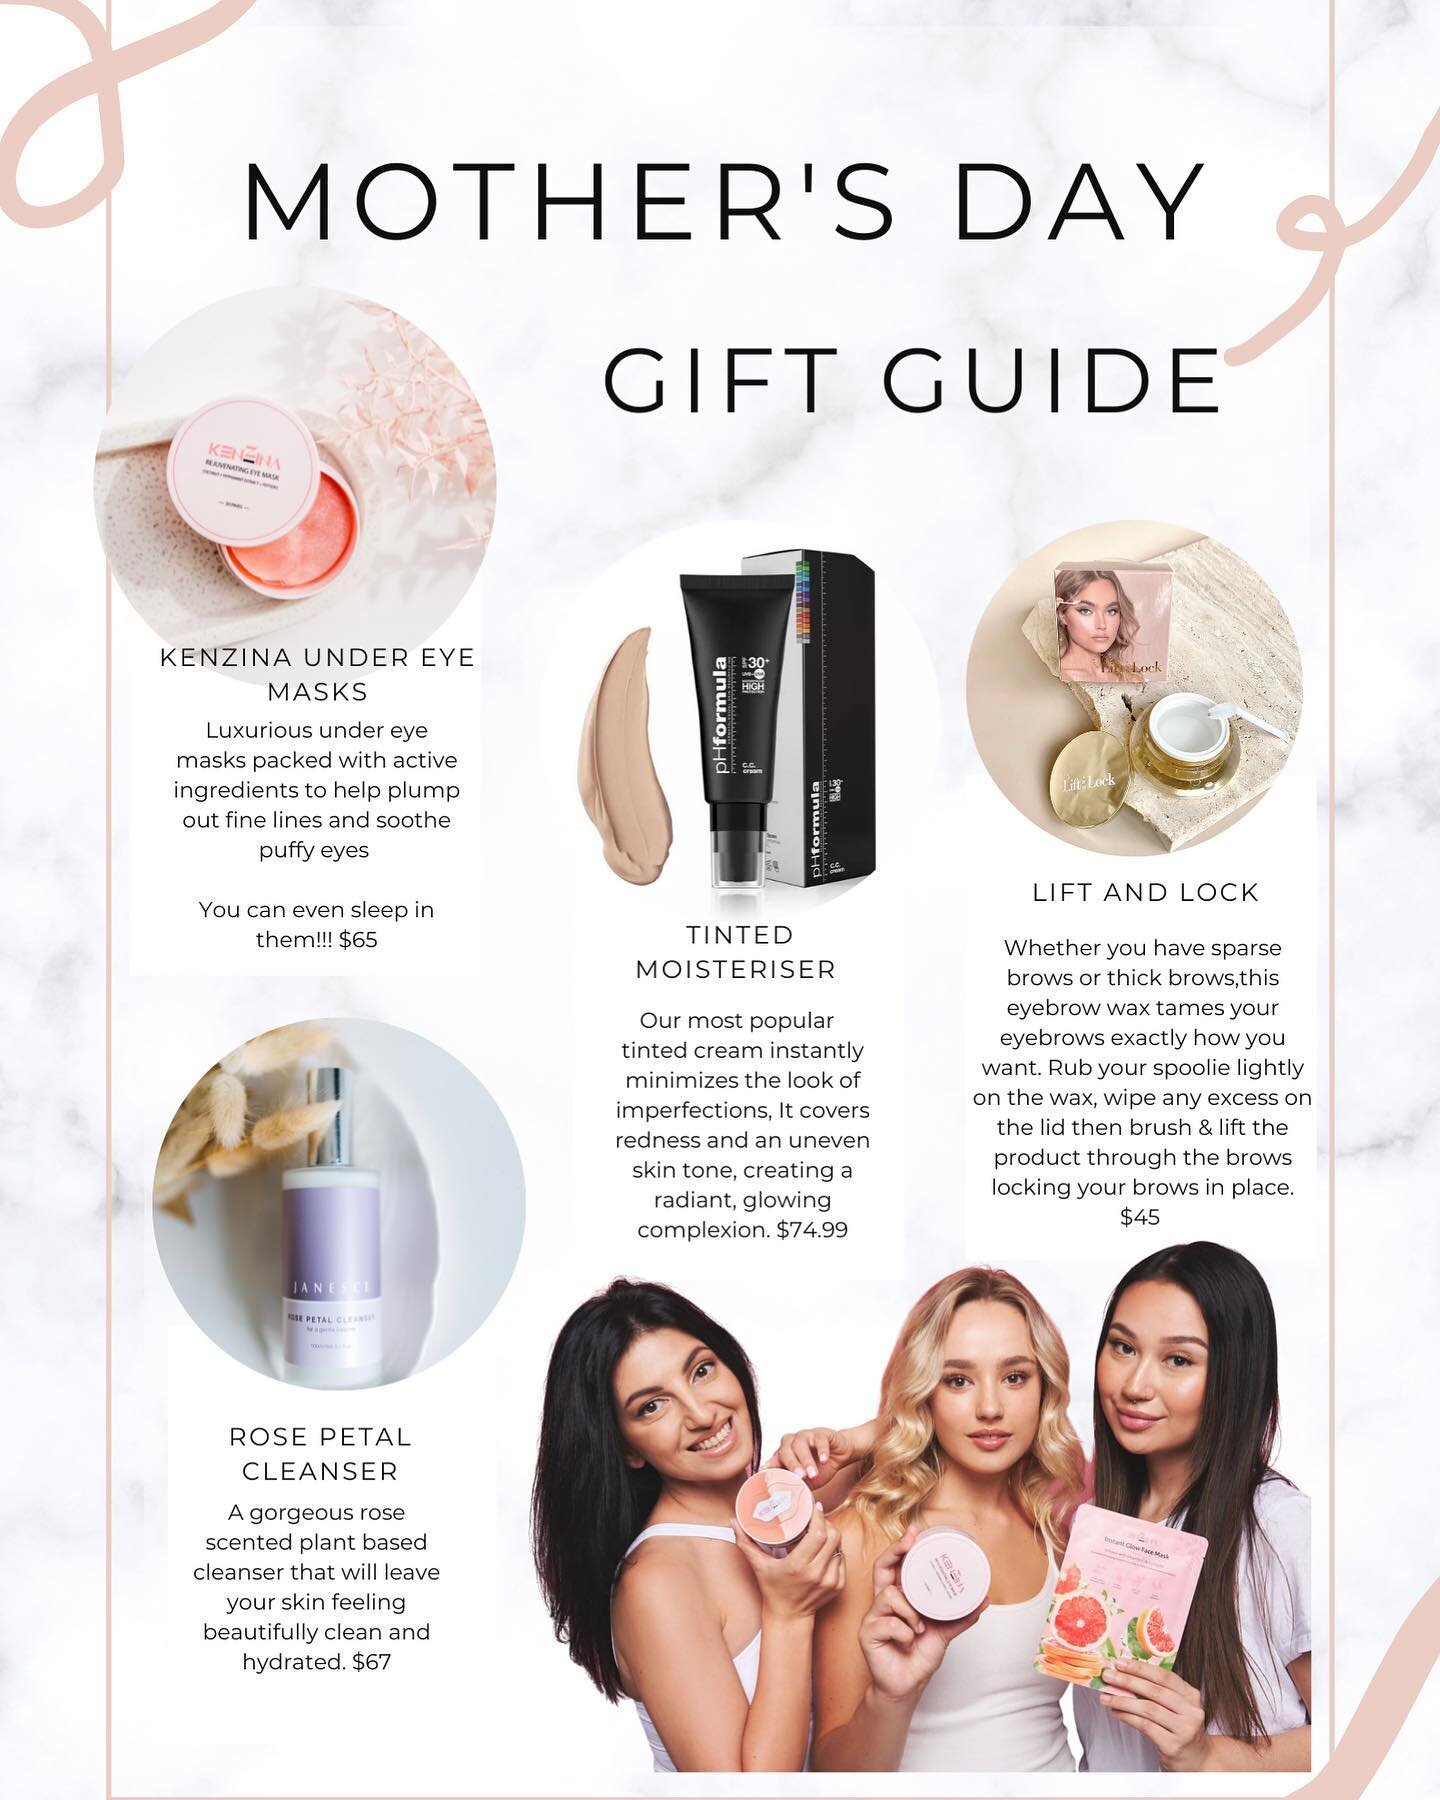 Gift giving made easy ✨

Celebrate mum this Mother&rsquo;s Day with one of our beautiful gift options from Beau Monde. Here are just a few ideas and they are all available instore or online 

https://www.beaumonde.co.nz/shop

All Kenzina under eye ma